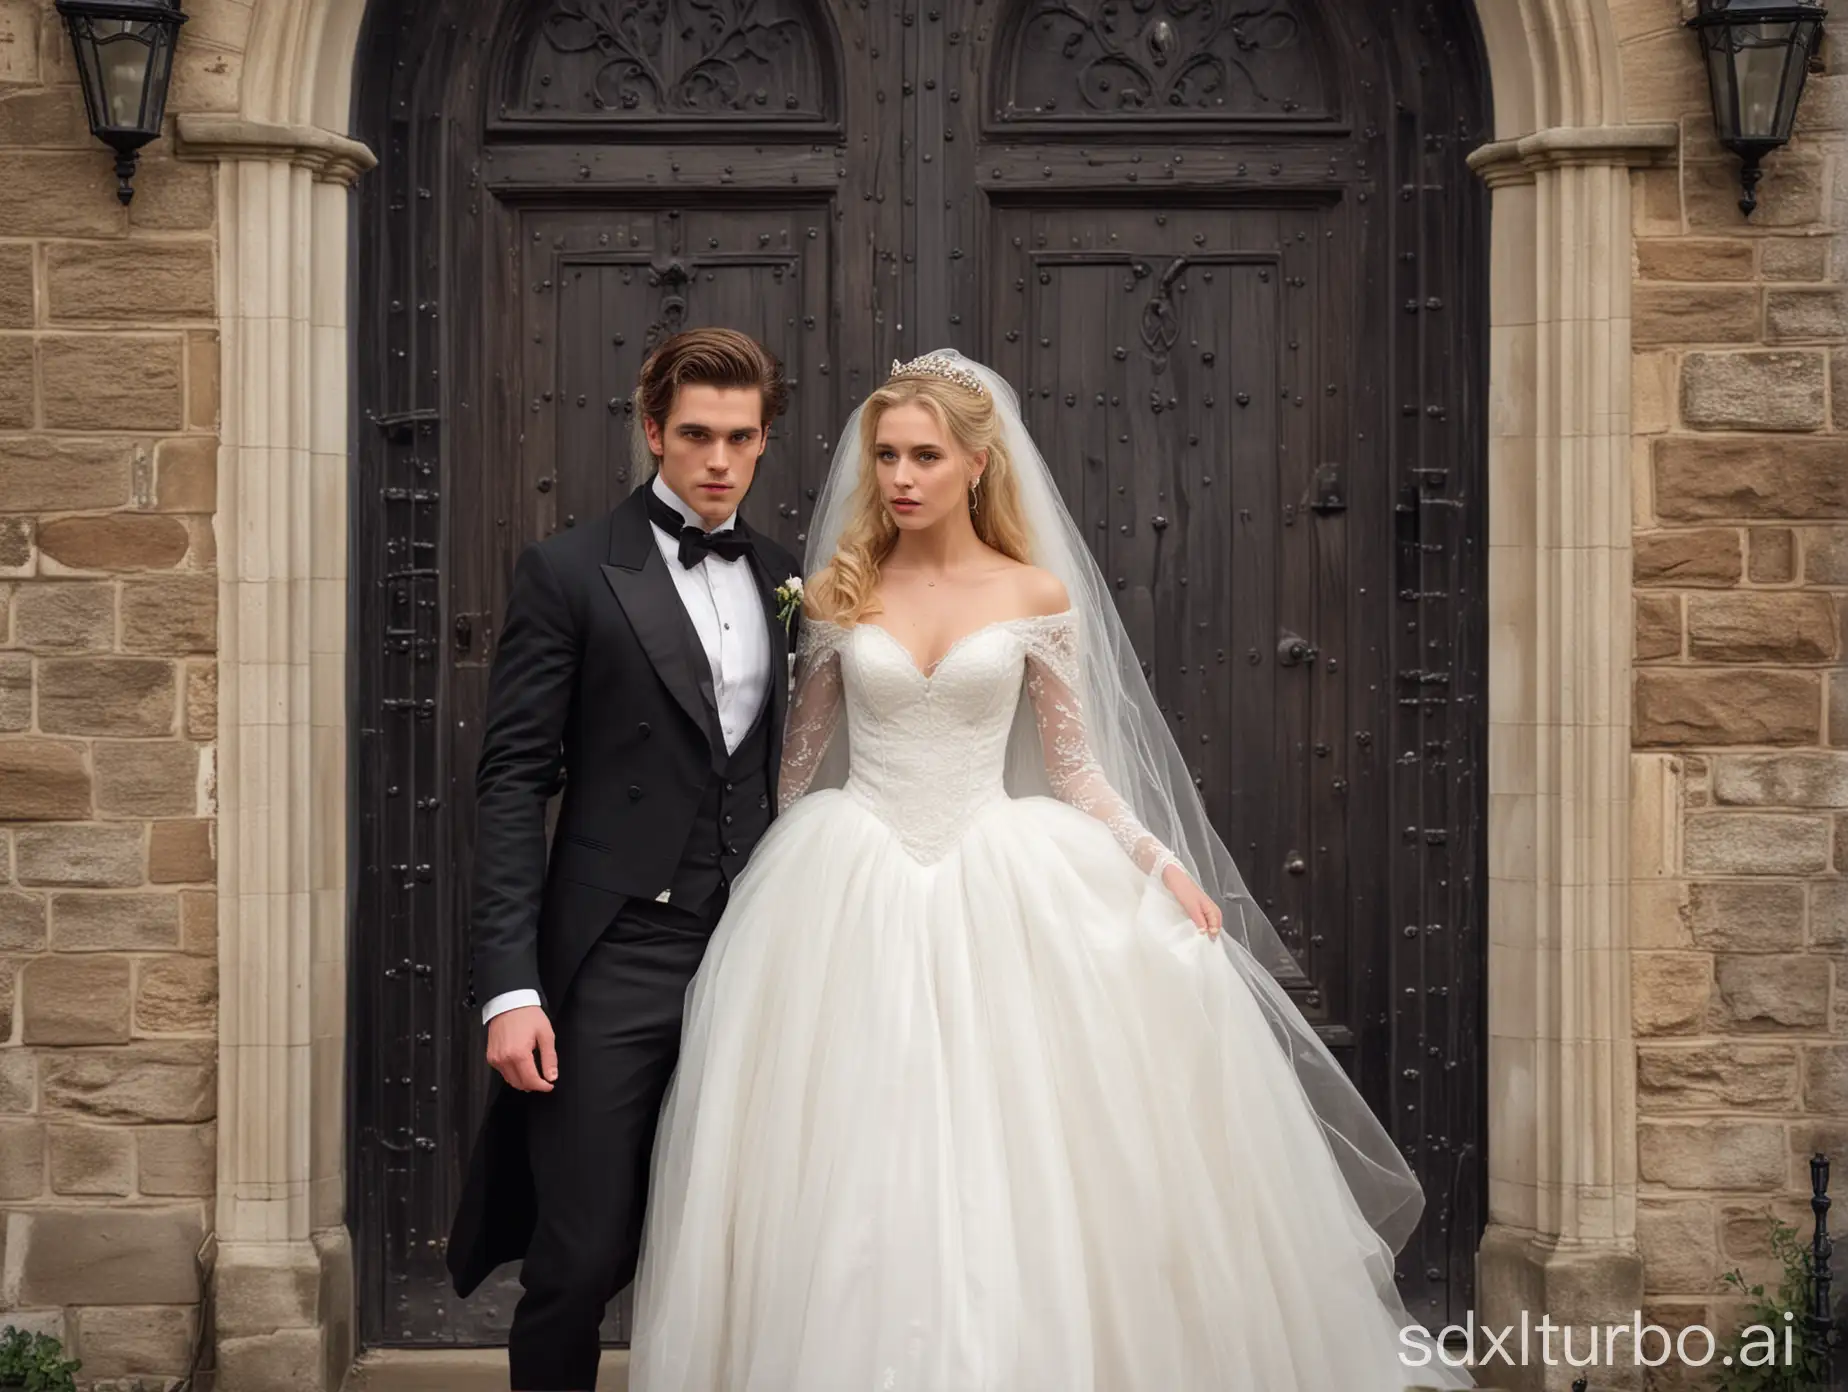 A tall elegant young handsome burly brunette groom with hair below his shoulders, wearing a black tailcoat, looking like a stunningly handsome arrogant vampire, and a young beautiful shy blonde bride in a white wedding long dress with closed sleeves, a puffy skirt and a translucent veil, walk out of the church doors in the Victorian era.